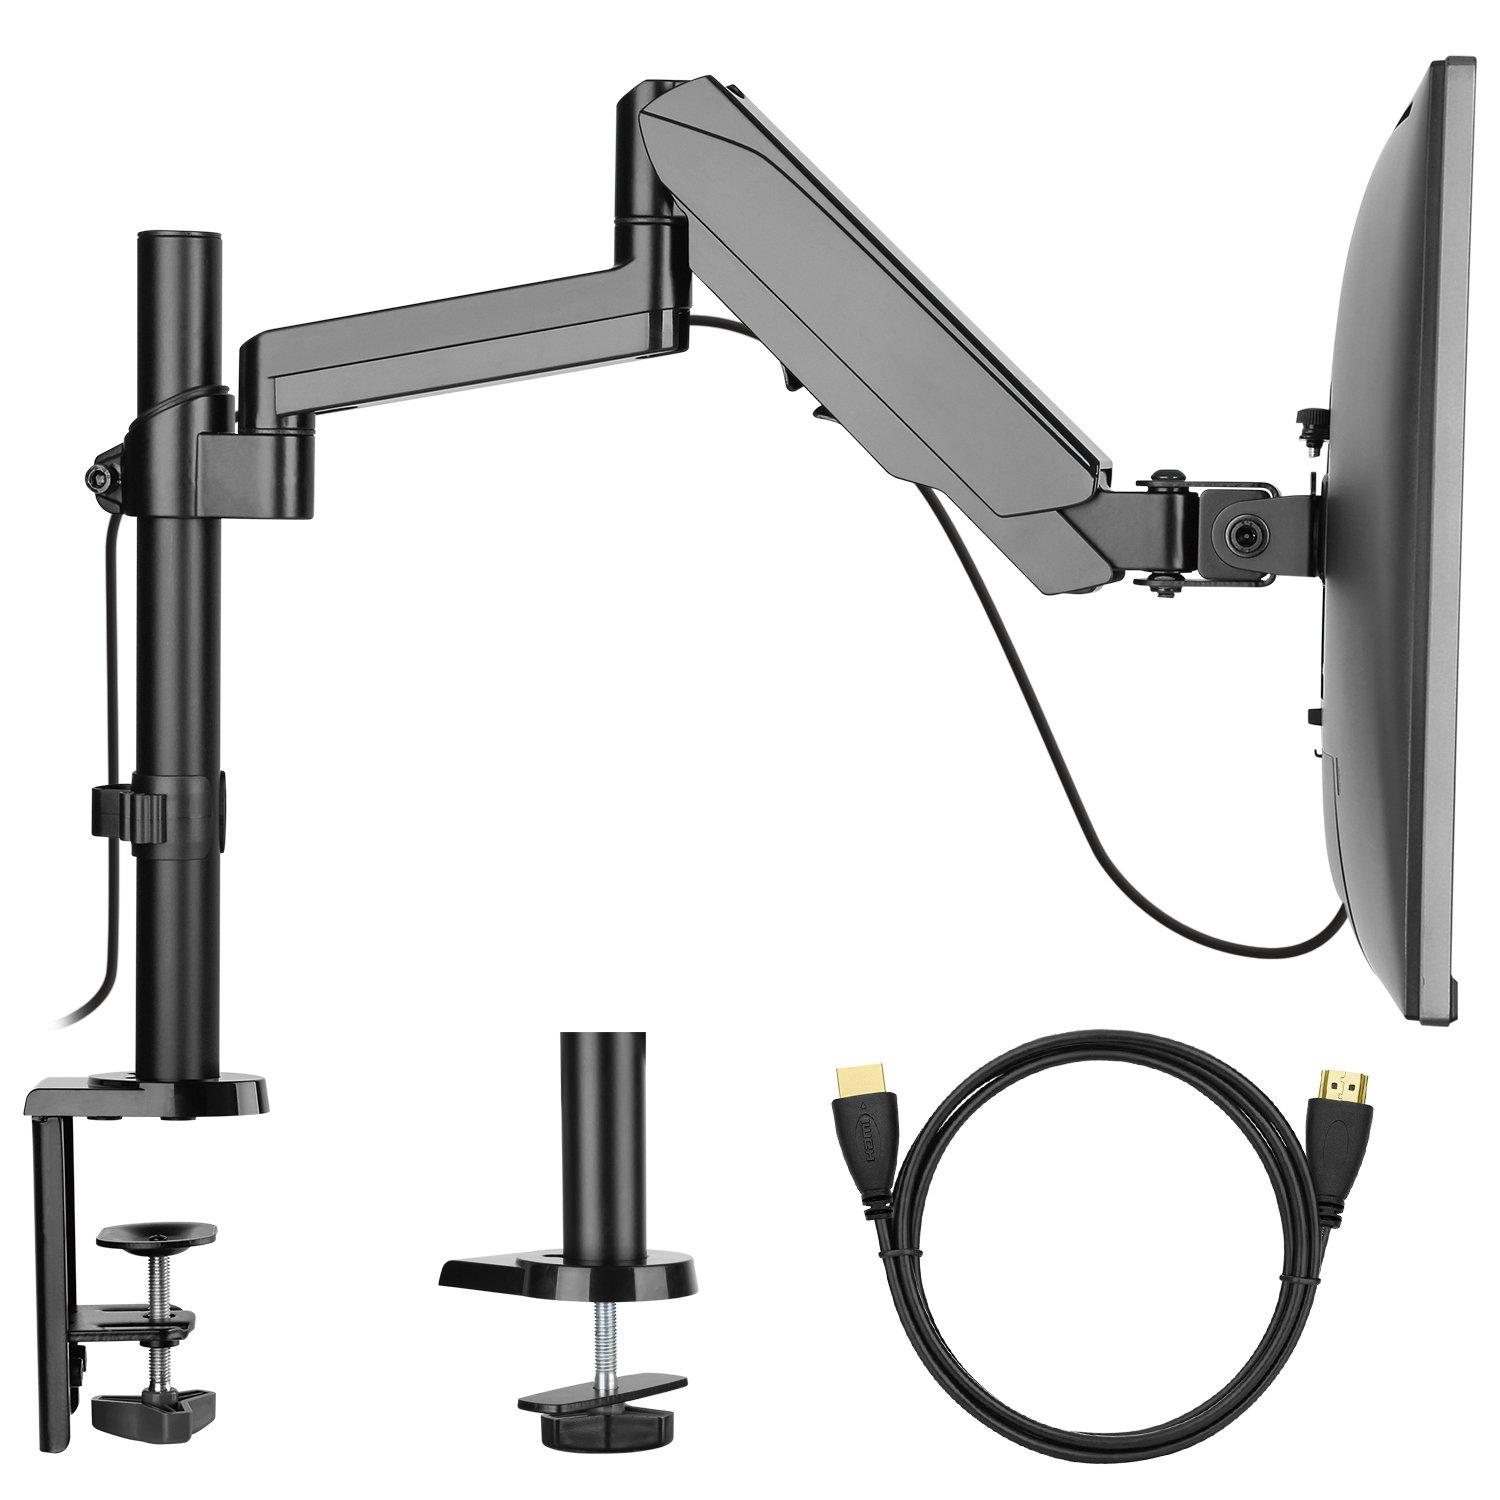 Monitor Mount Stand Adjustable Single Arm Desk VESA Mount with Clamp,  Grommet Base, HDMI Cable for LCD LED Screens up to 32 inch, Gas Spring  Articulating Full Motion Arm Holds up